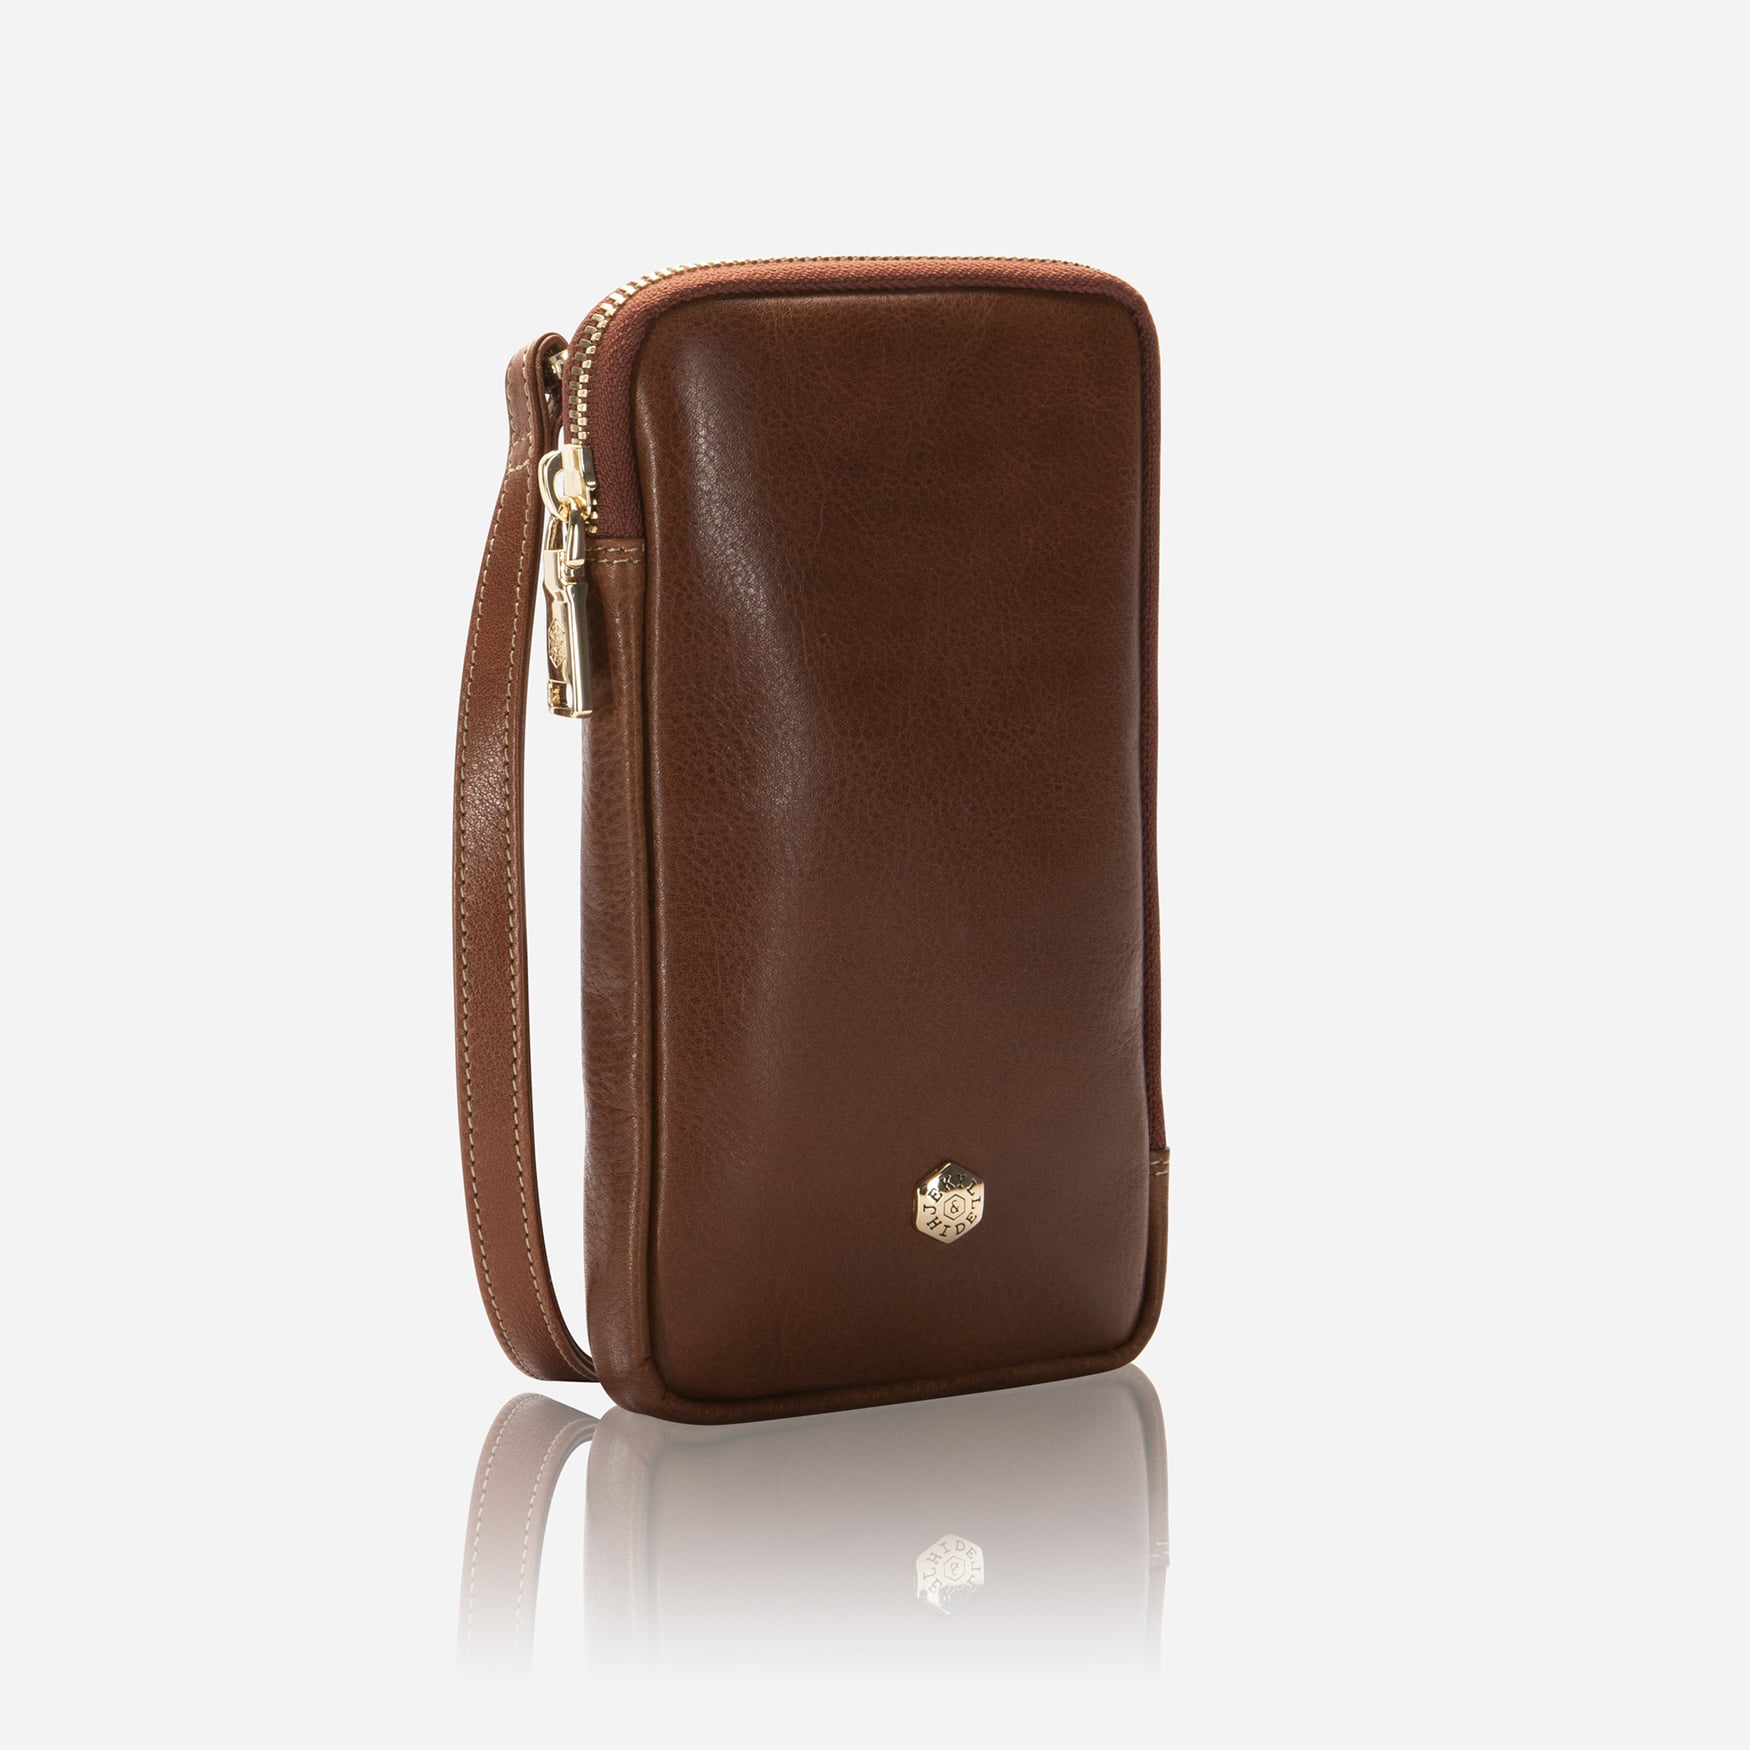 Mobile Phone Pouch With Strap, Tan